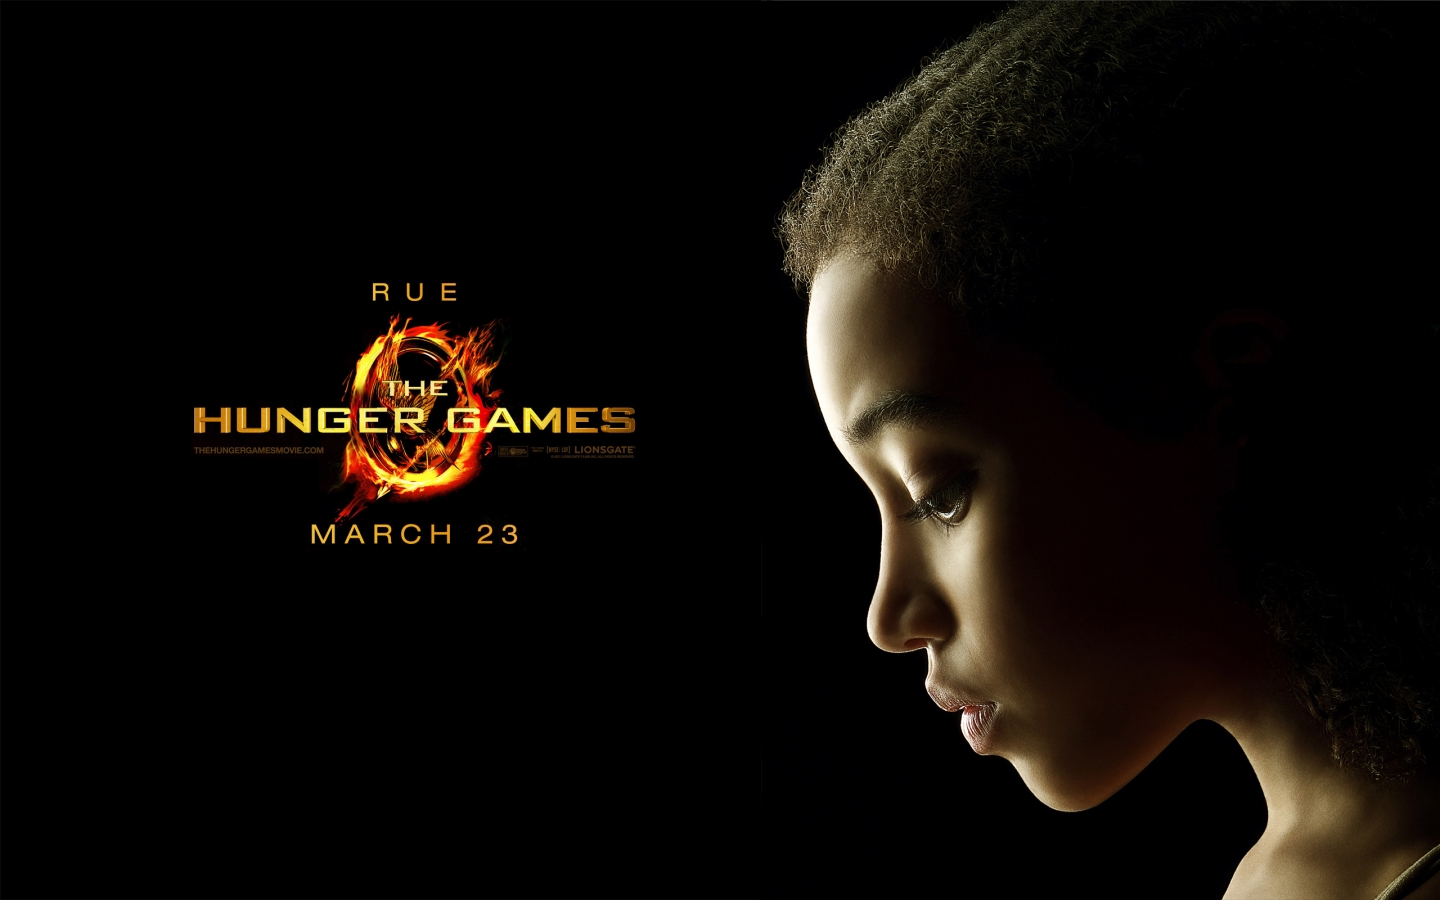 The Hunger Games Rue for 1440 x 900 widescreen resolution